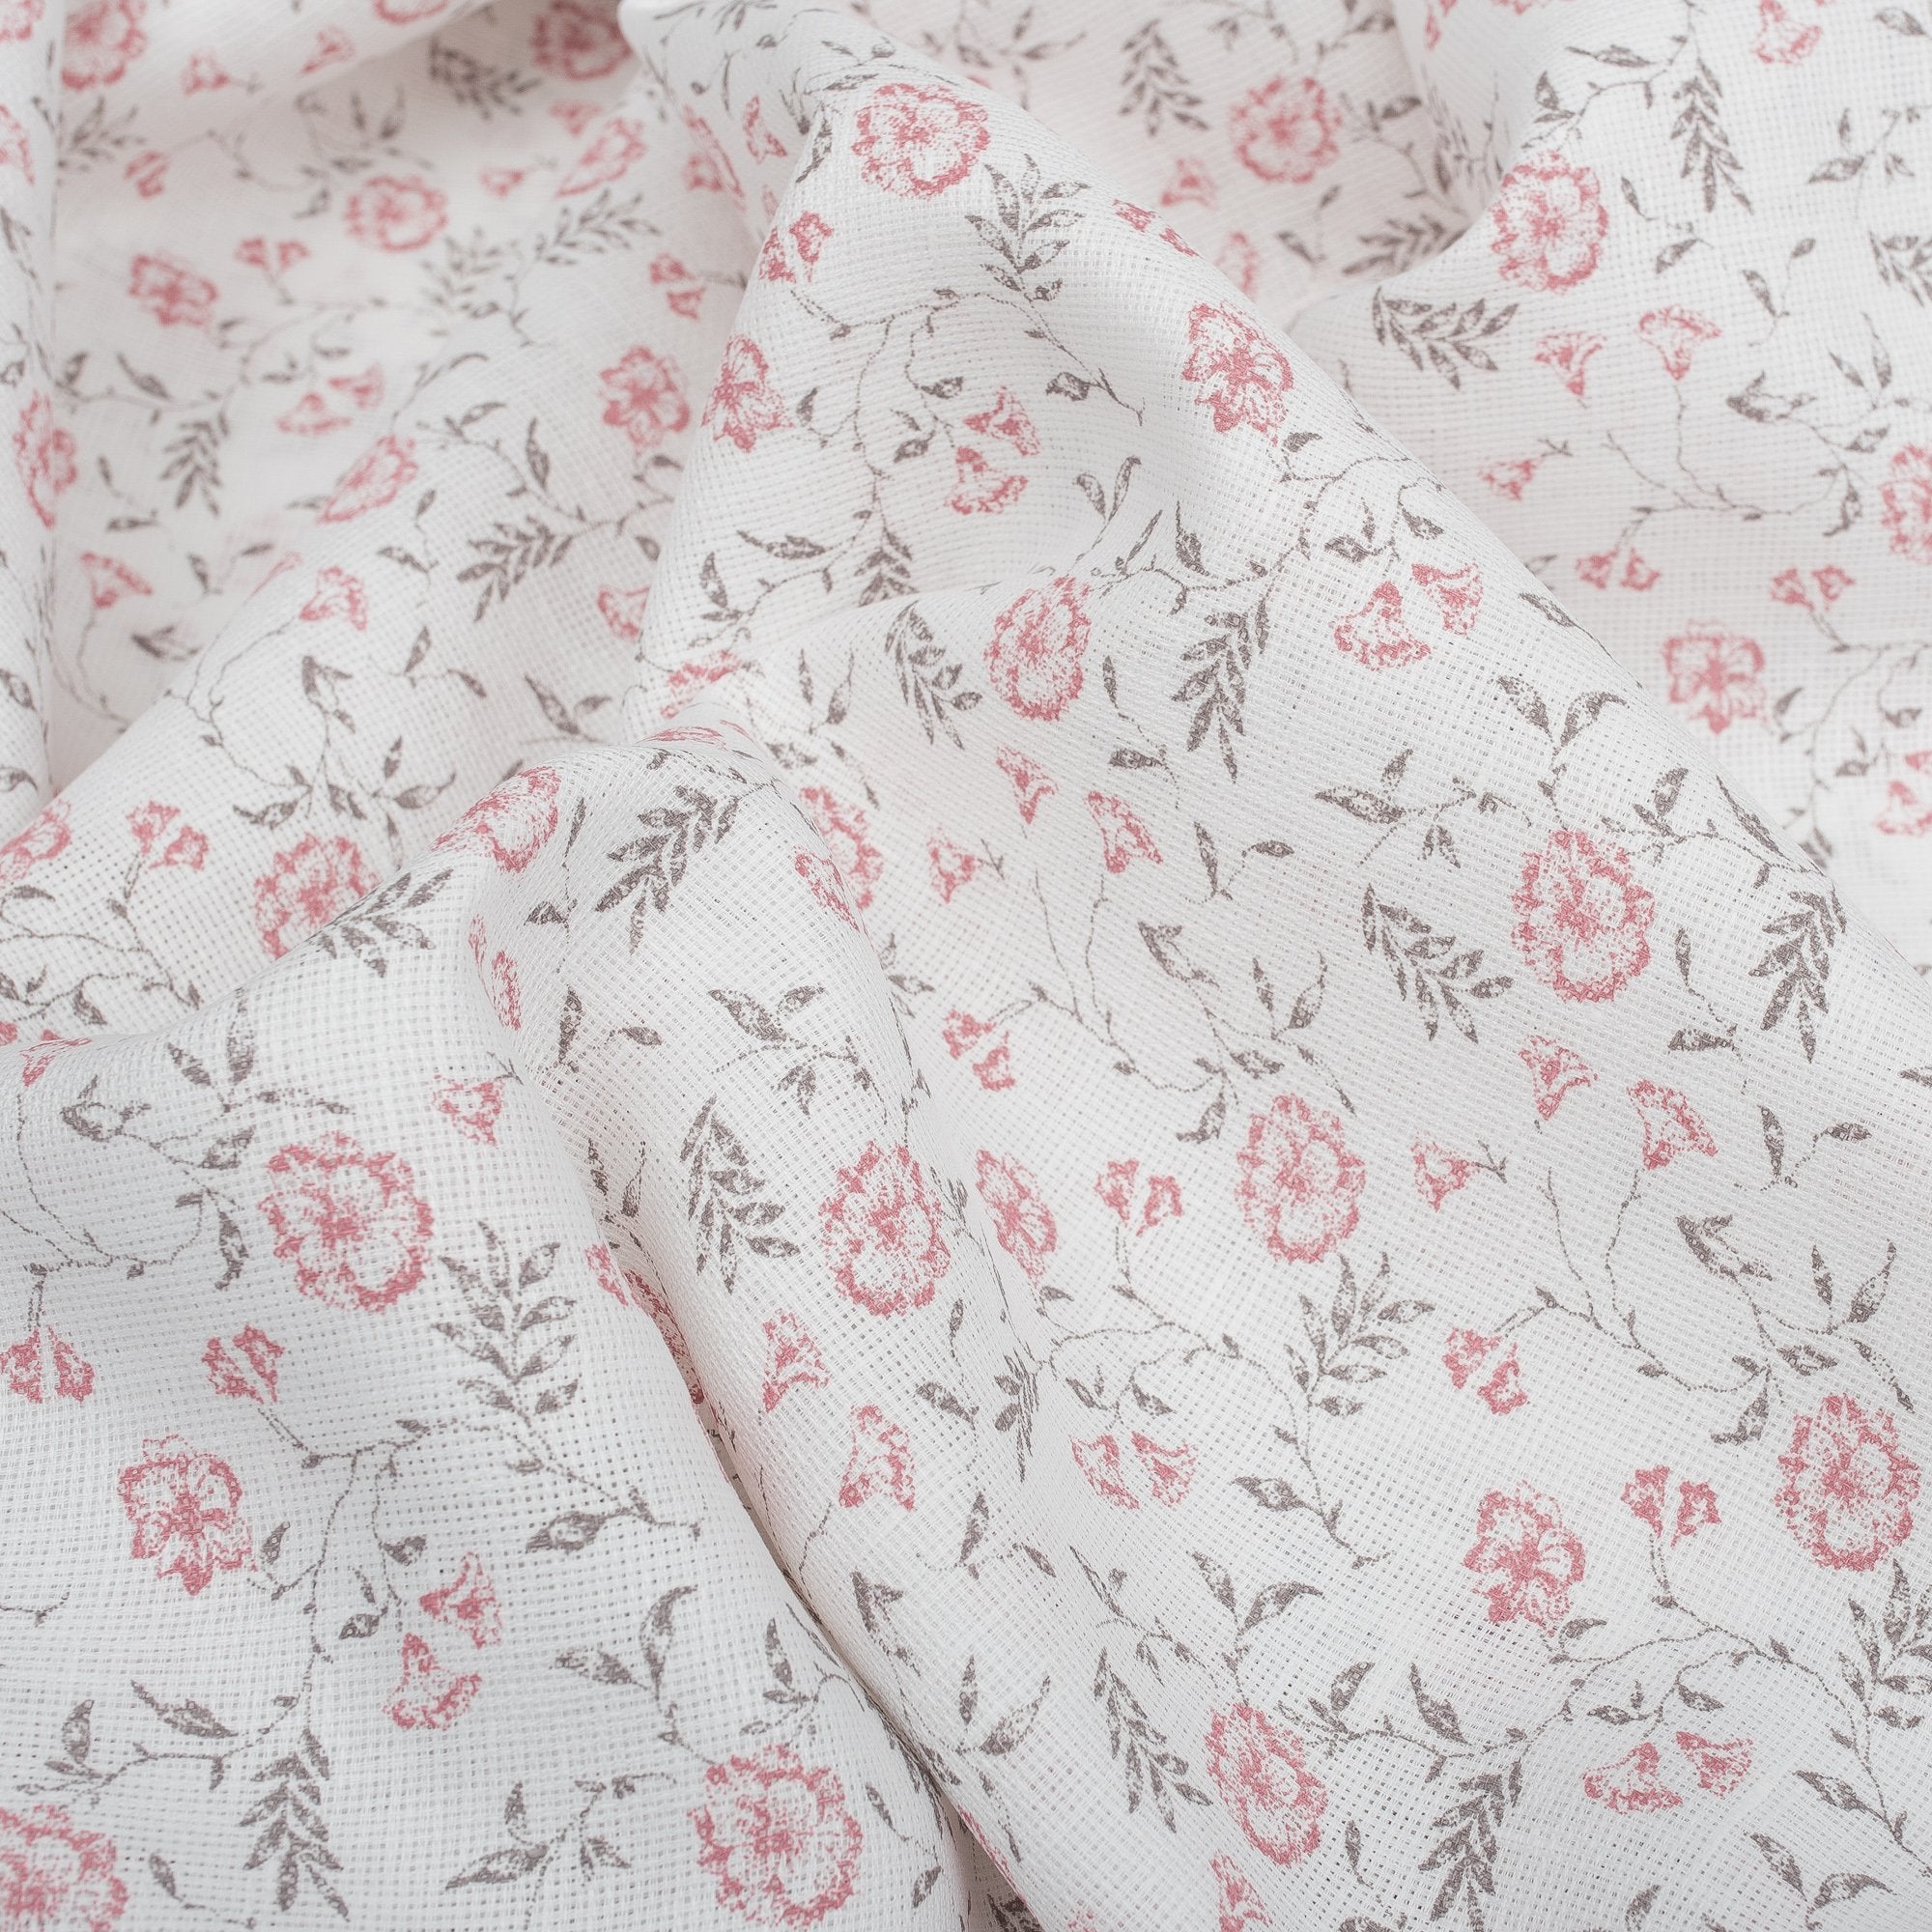 Blossom printed Sheer 100% French Flax Linen Fabric